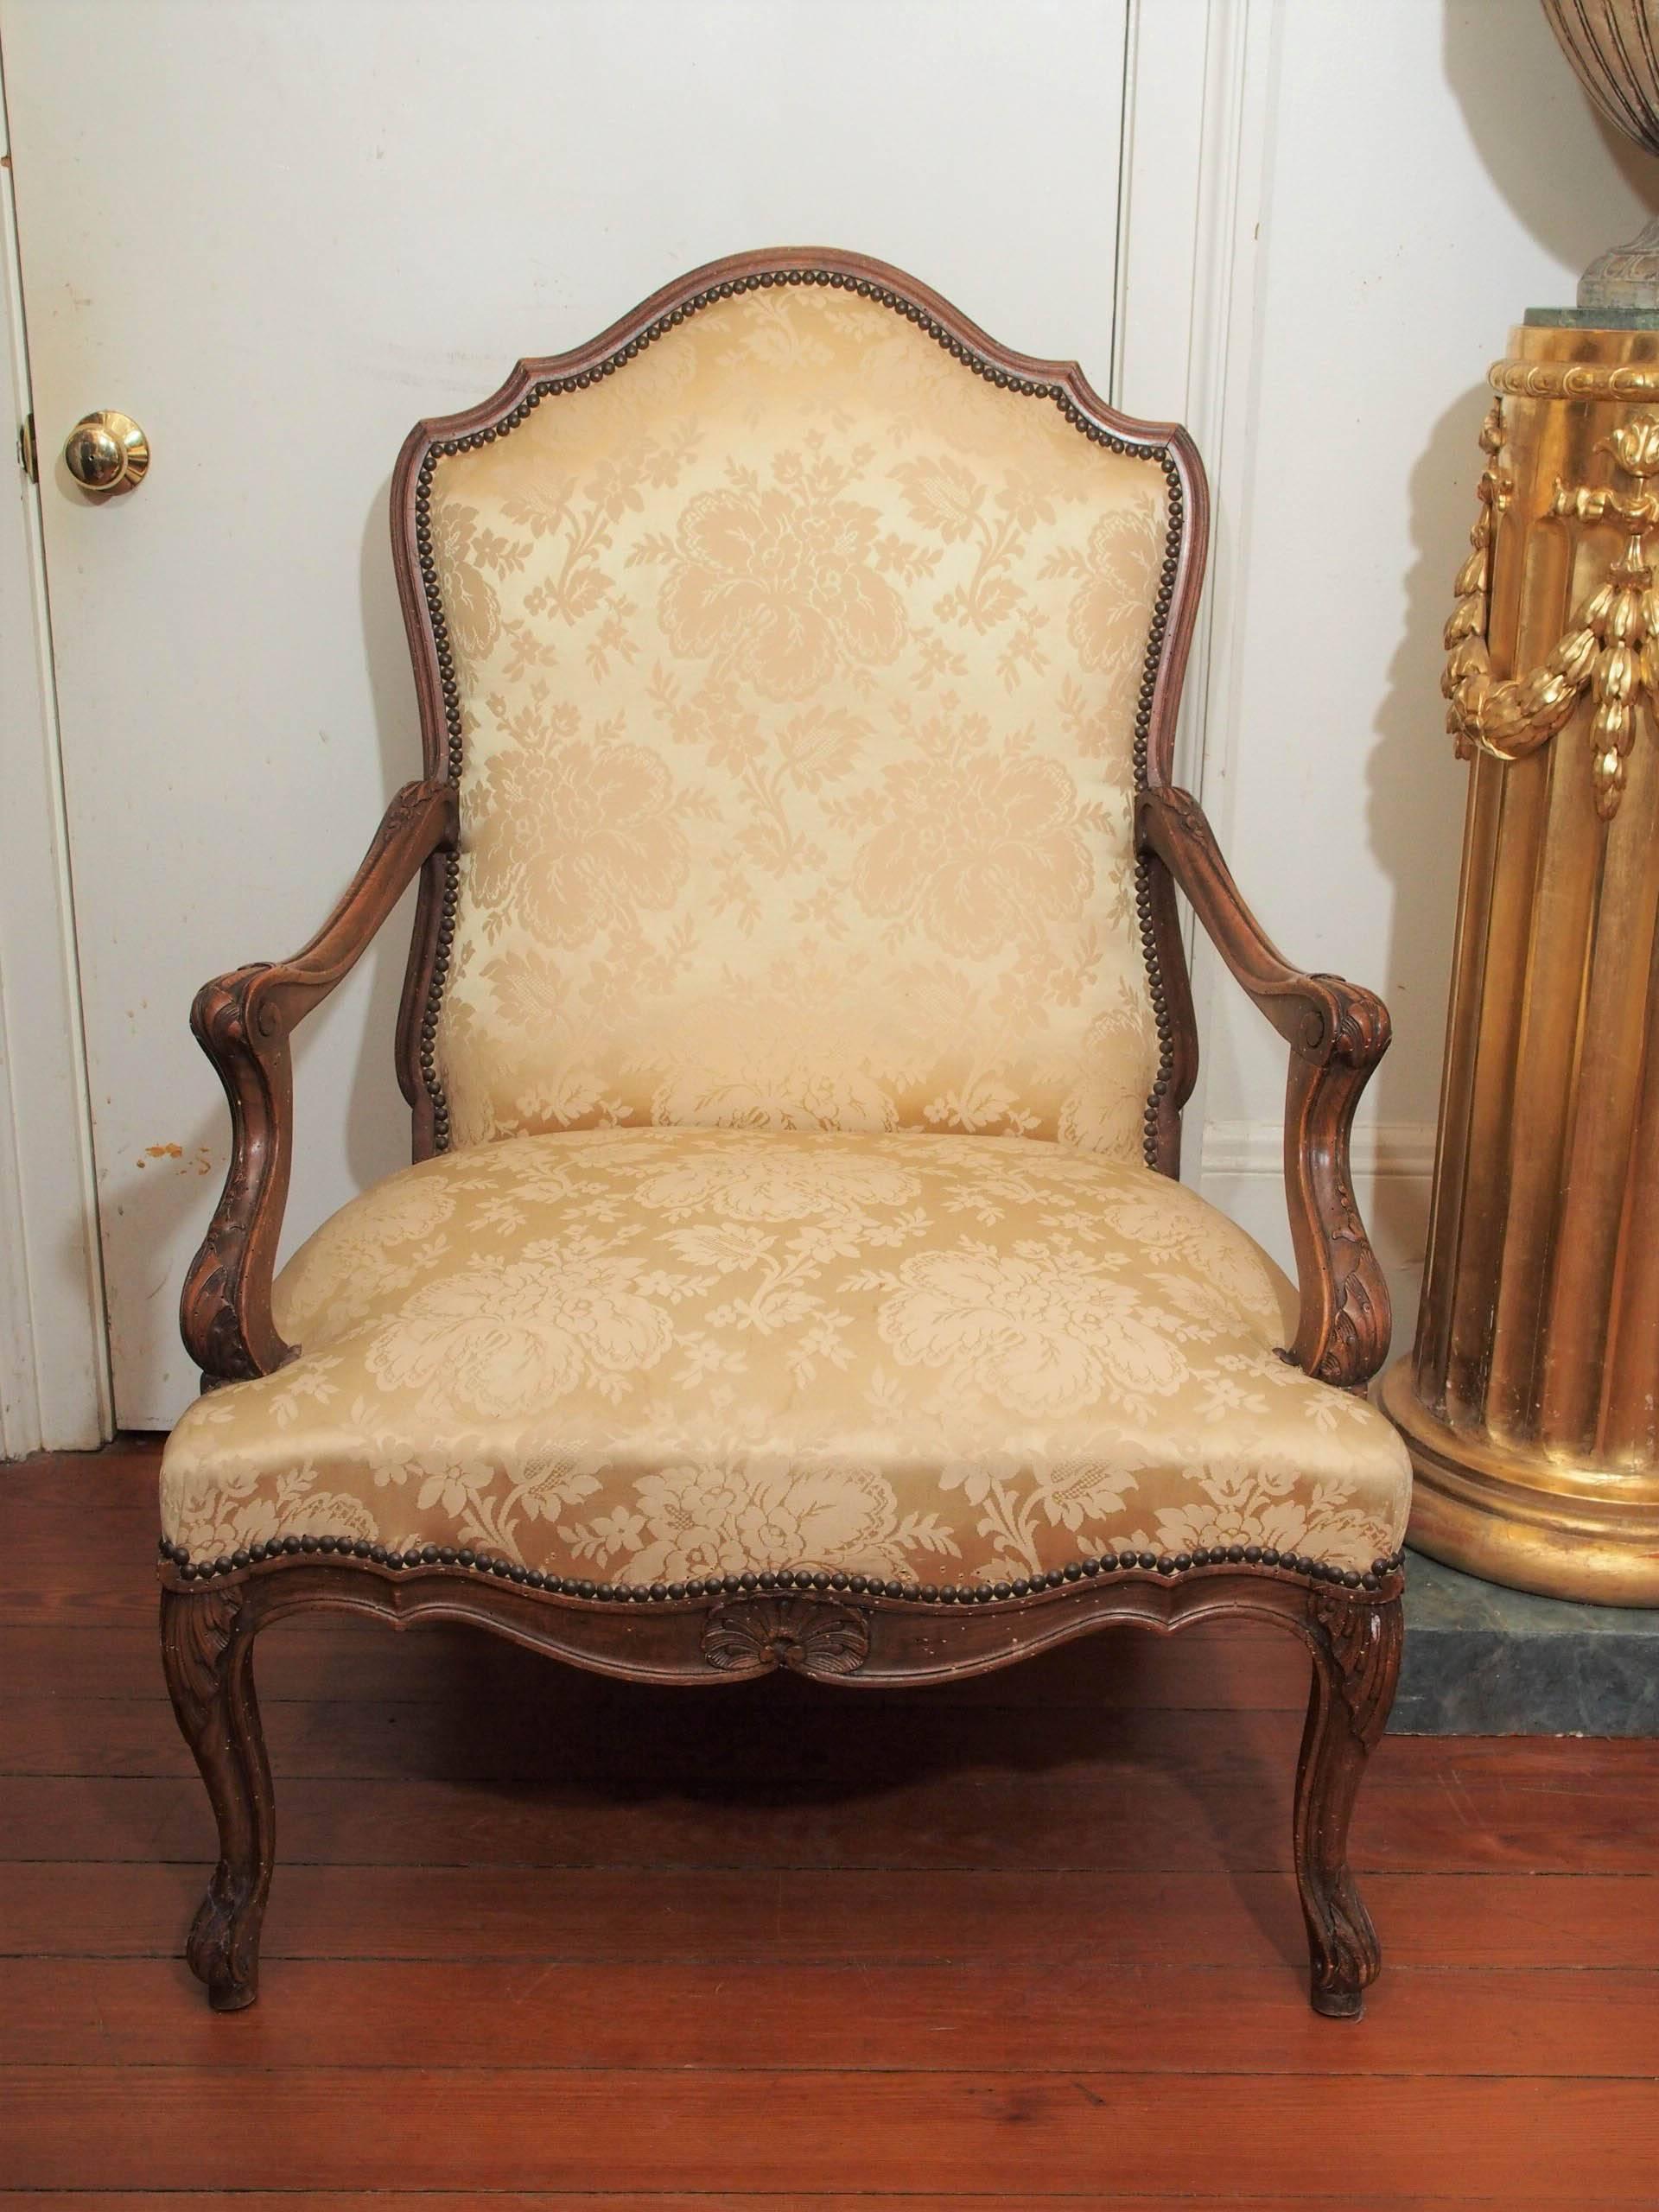 Pair of large-scale walnut shaped armchairs in the Louis XV style, Italian, late 19th century. Need recovering.